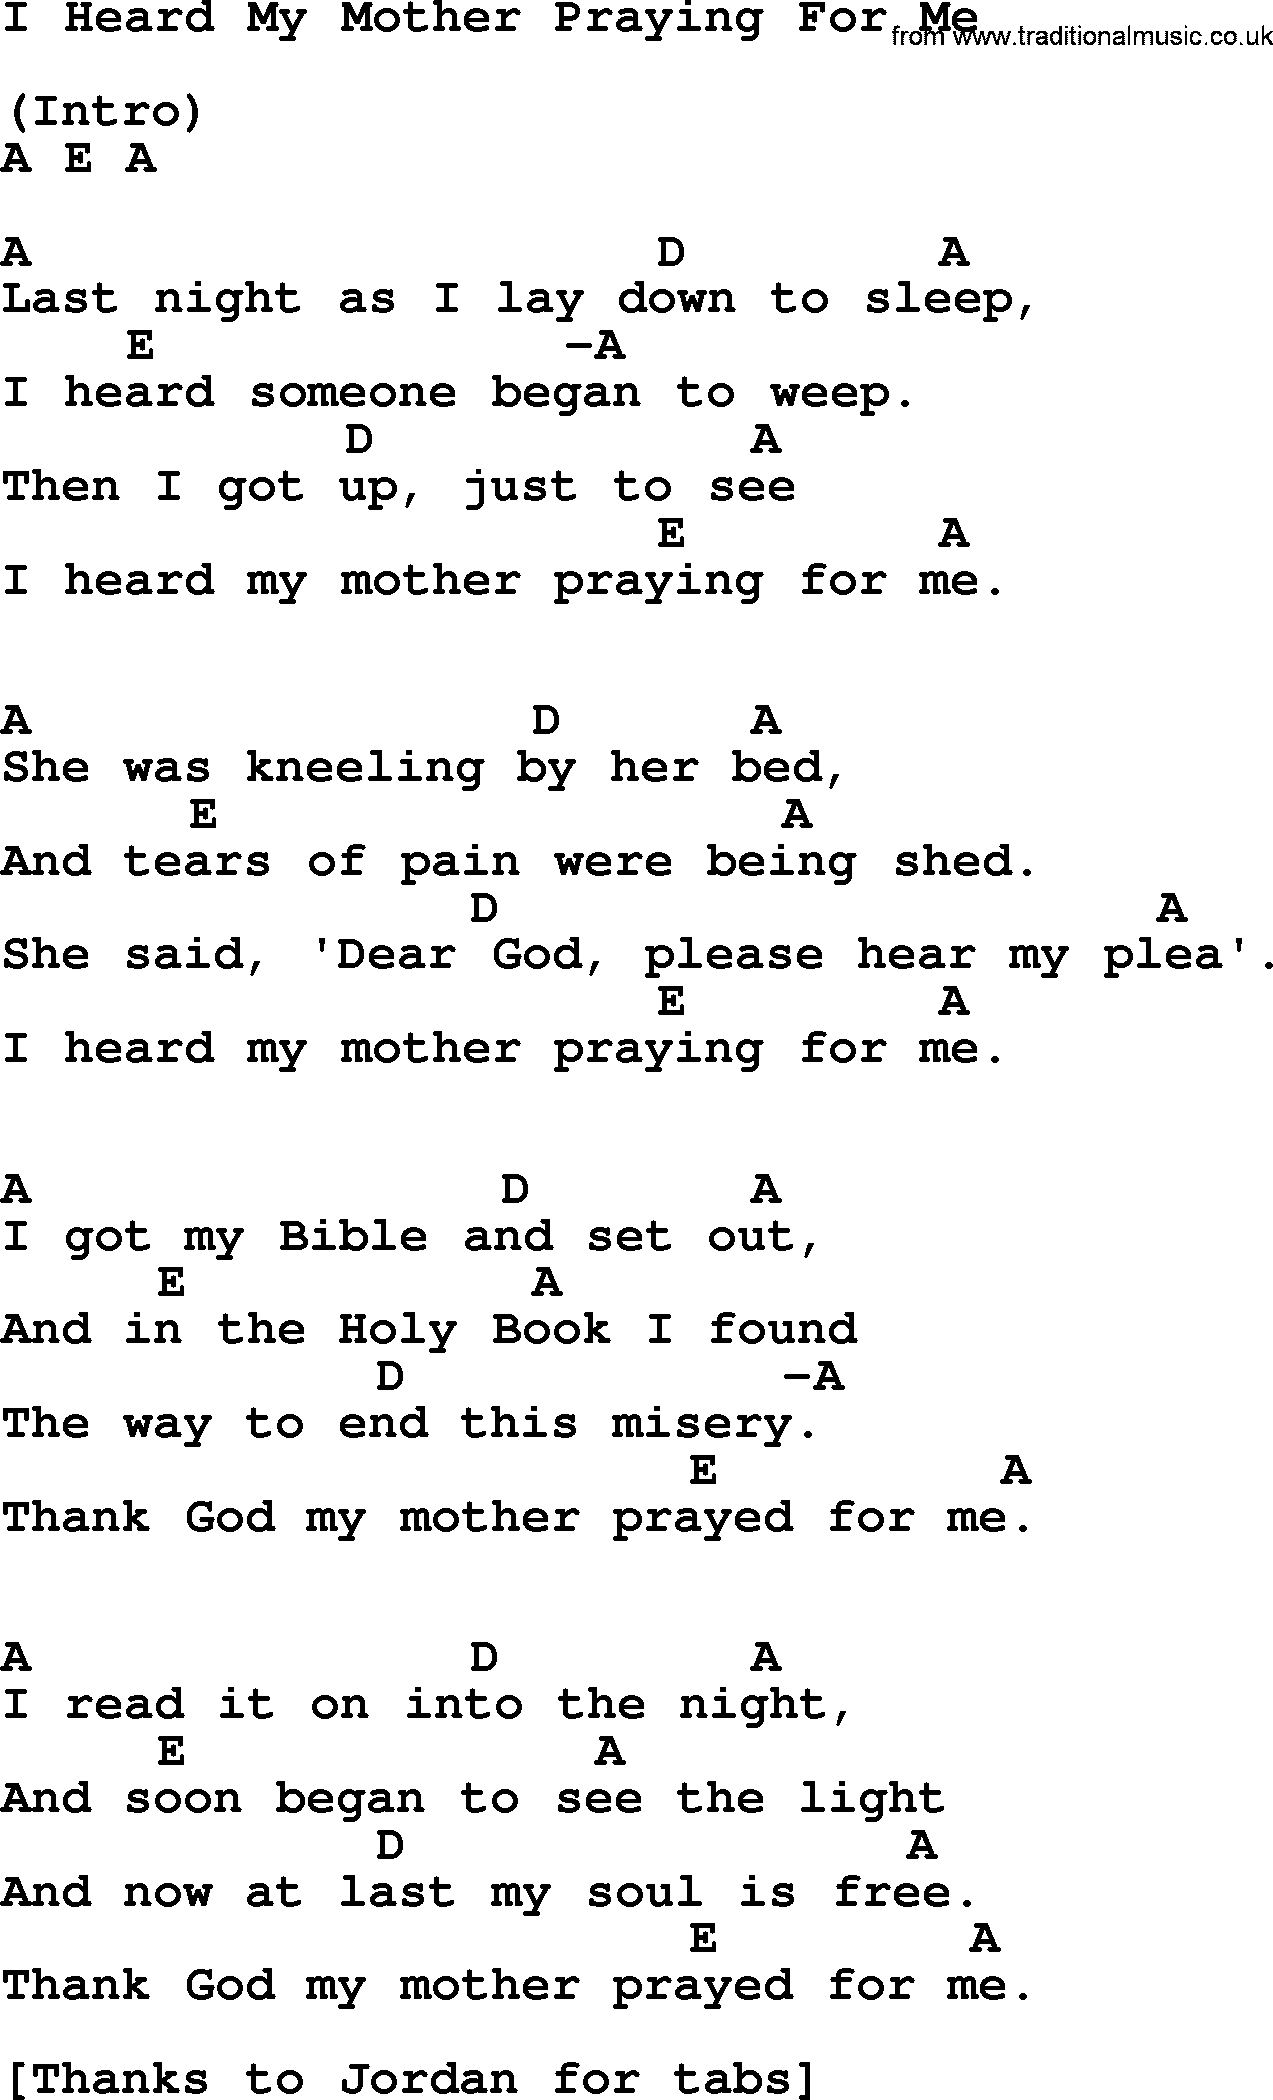 Hank Williams song I Heard My Mother Praying For Me, lyrics and chords